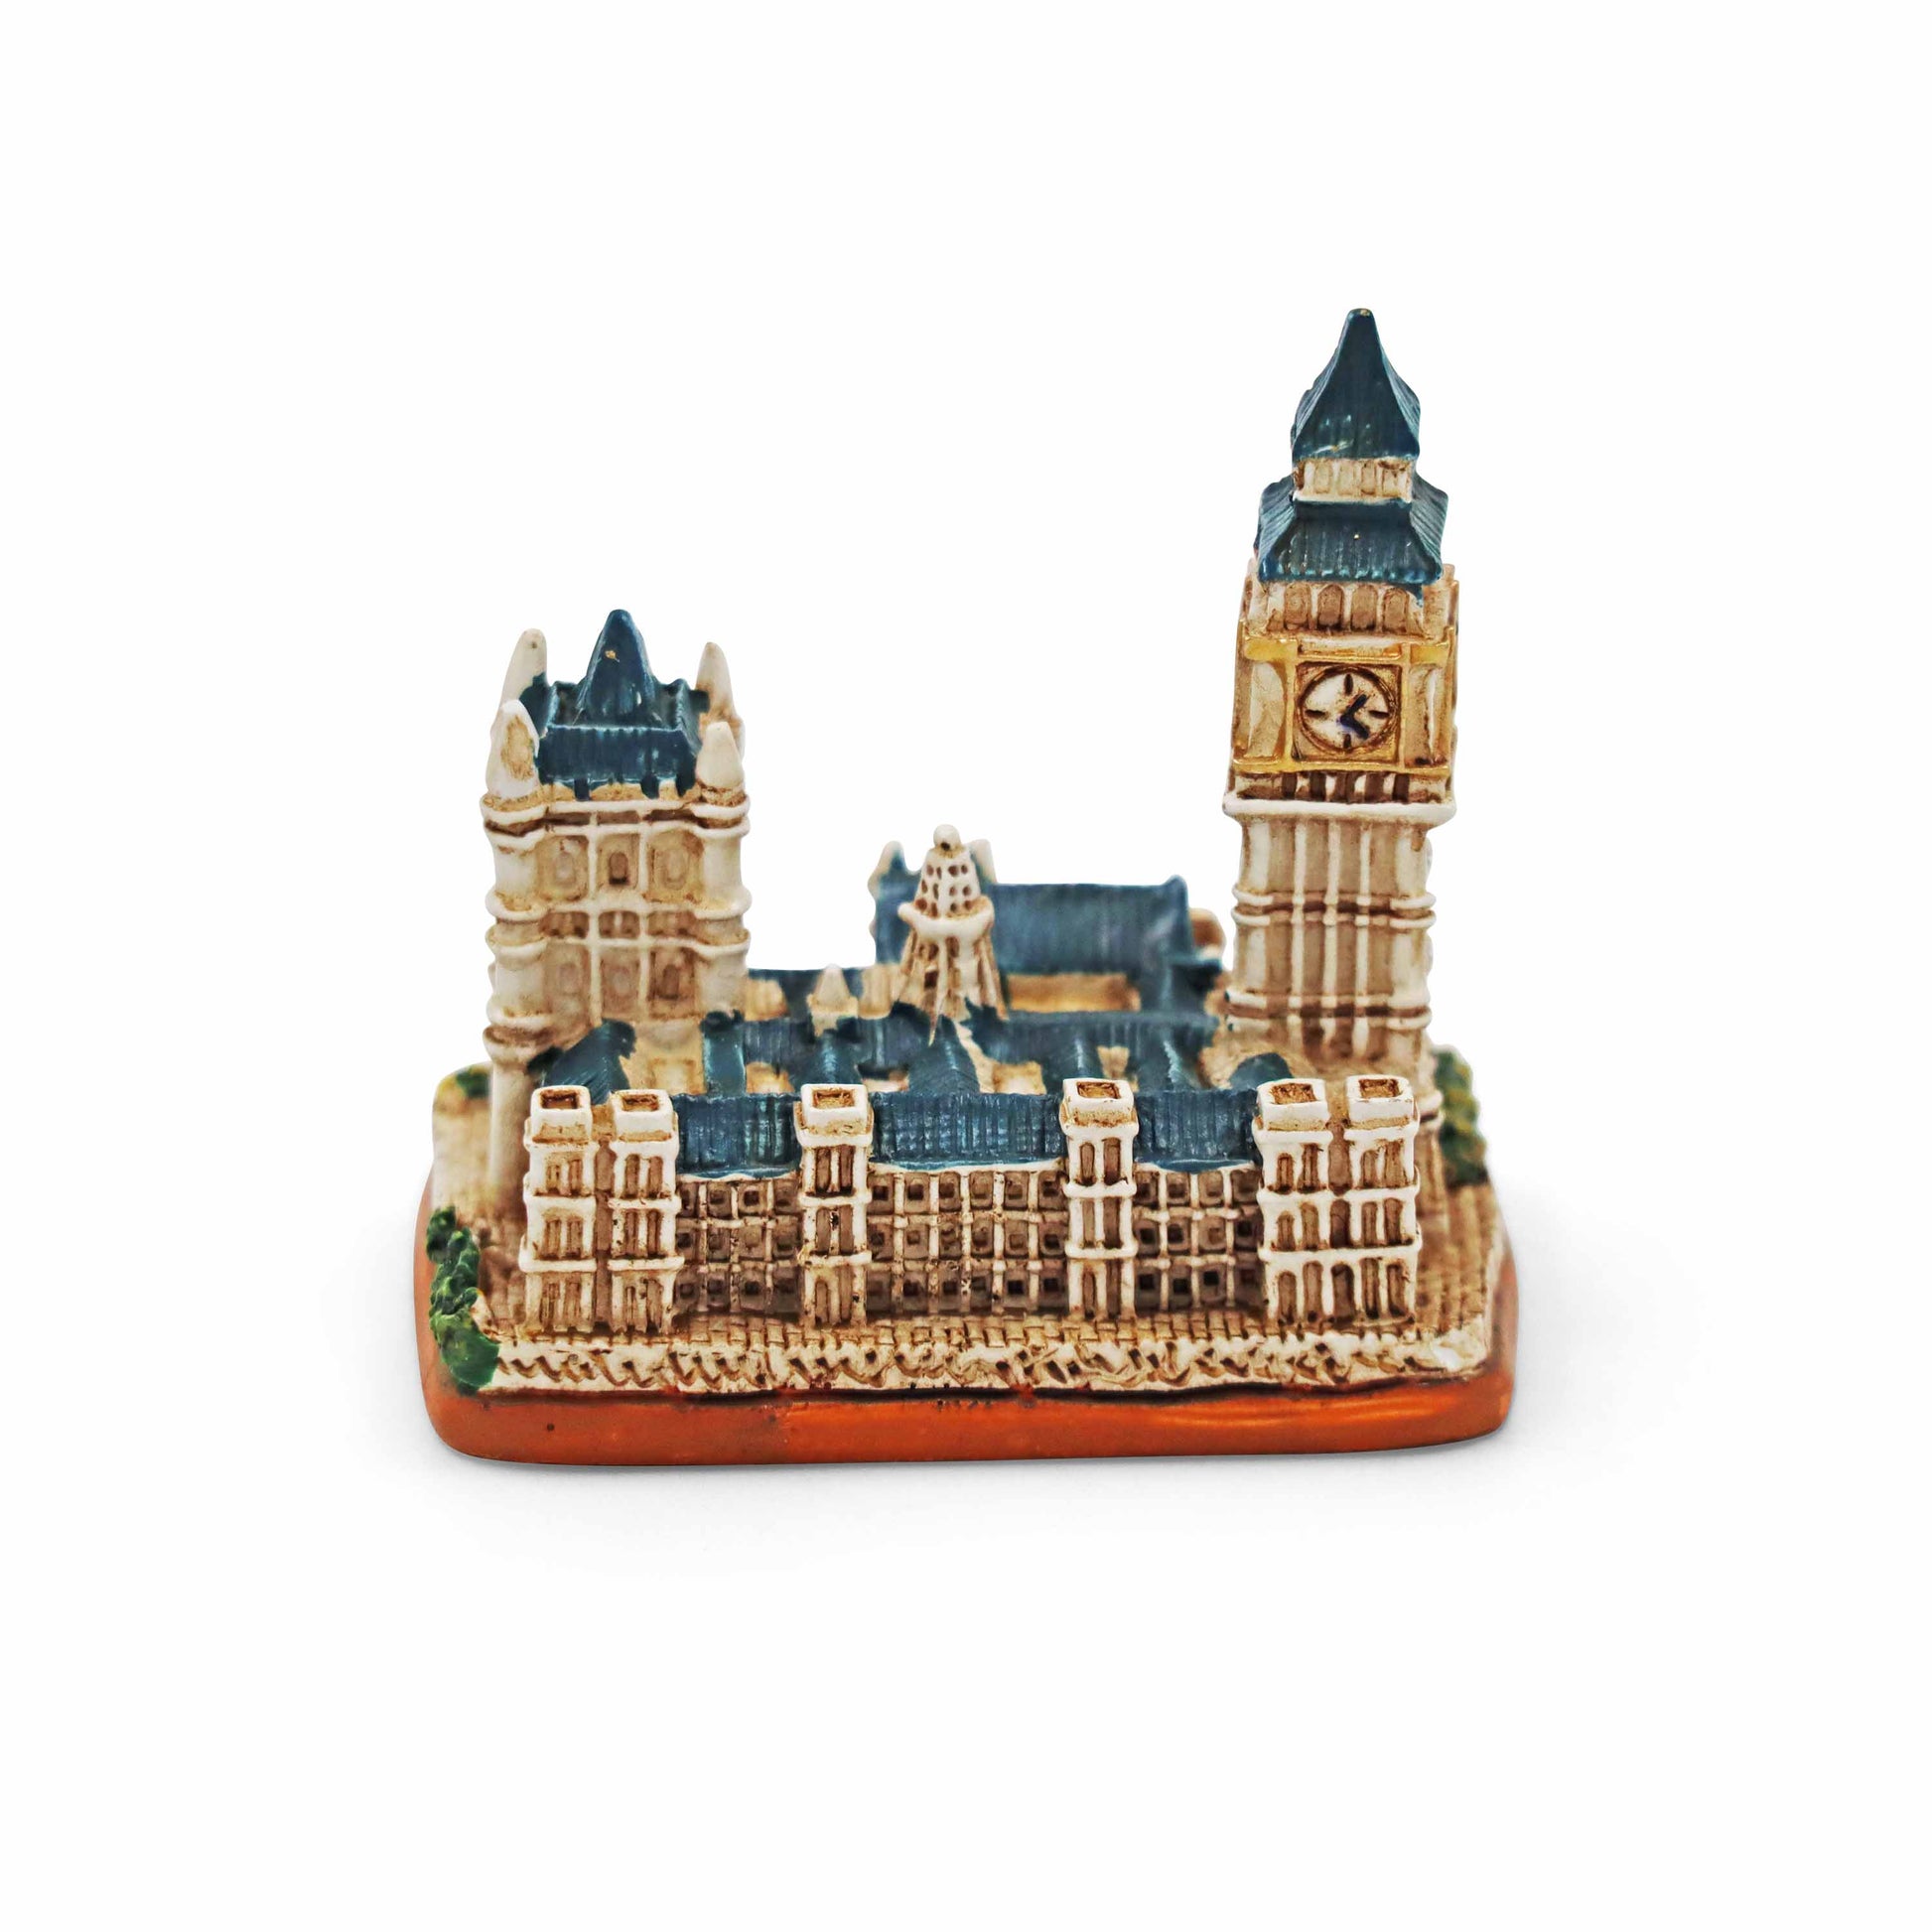 Houses of Parliament - Mini Stone Model - London Souvenirs & British Gifts